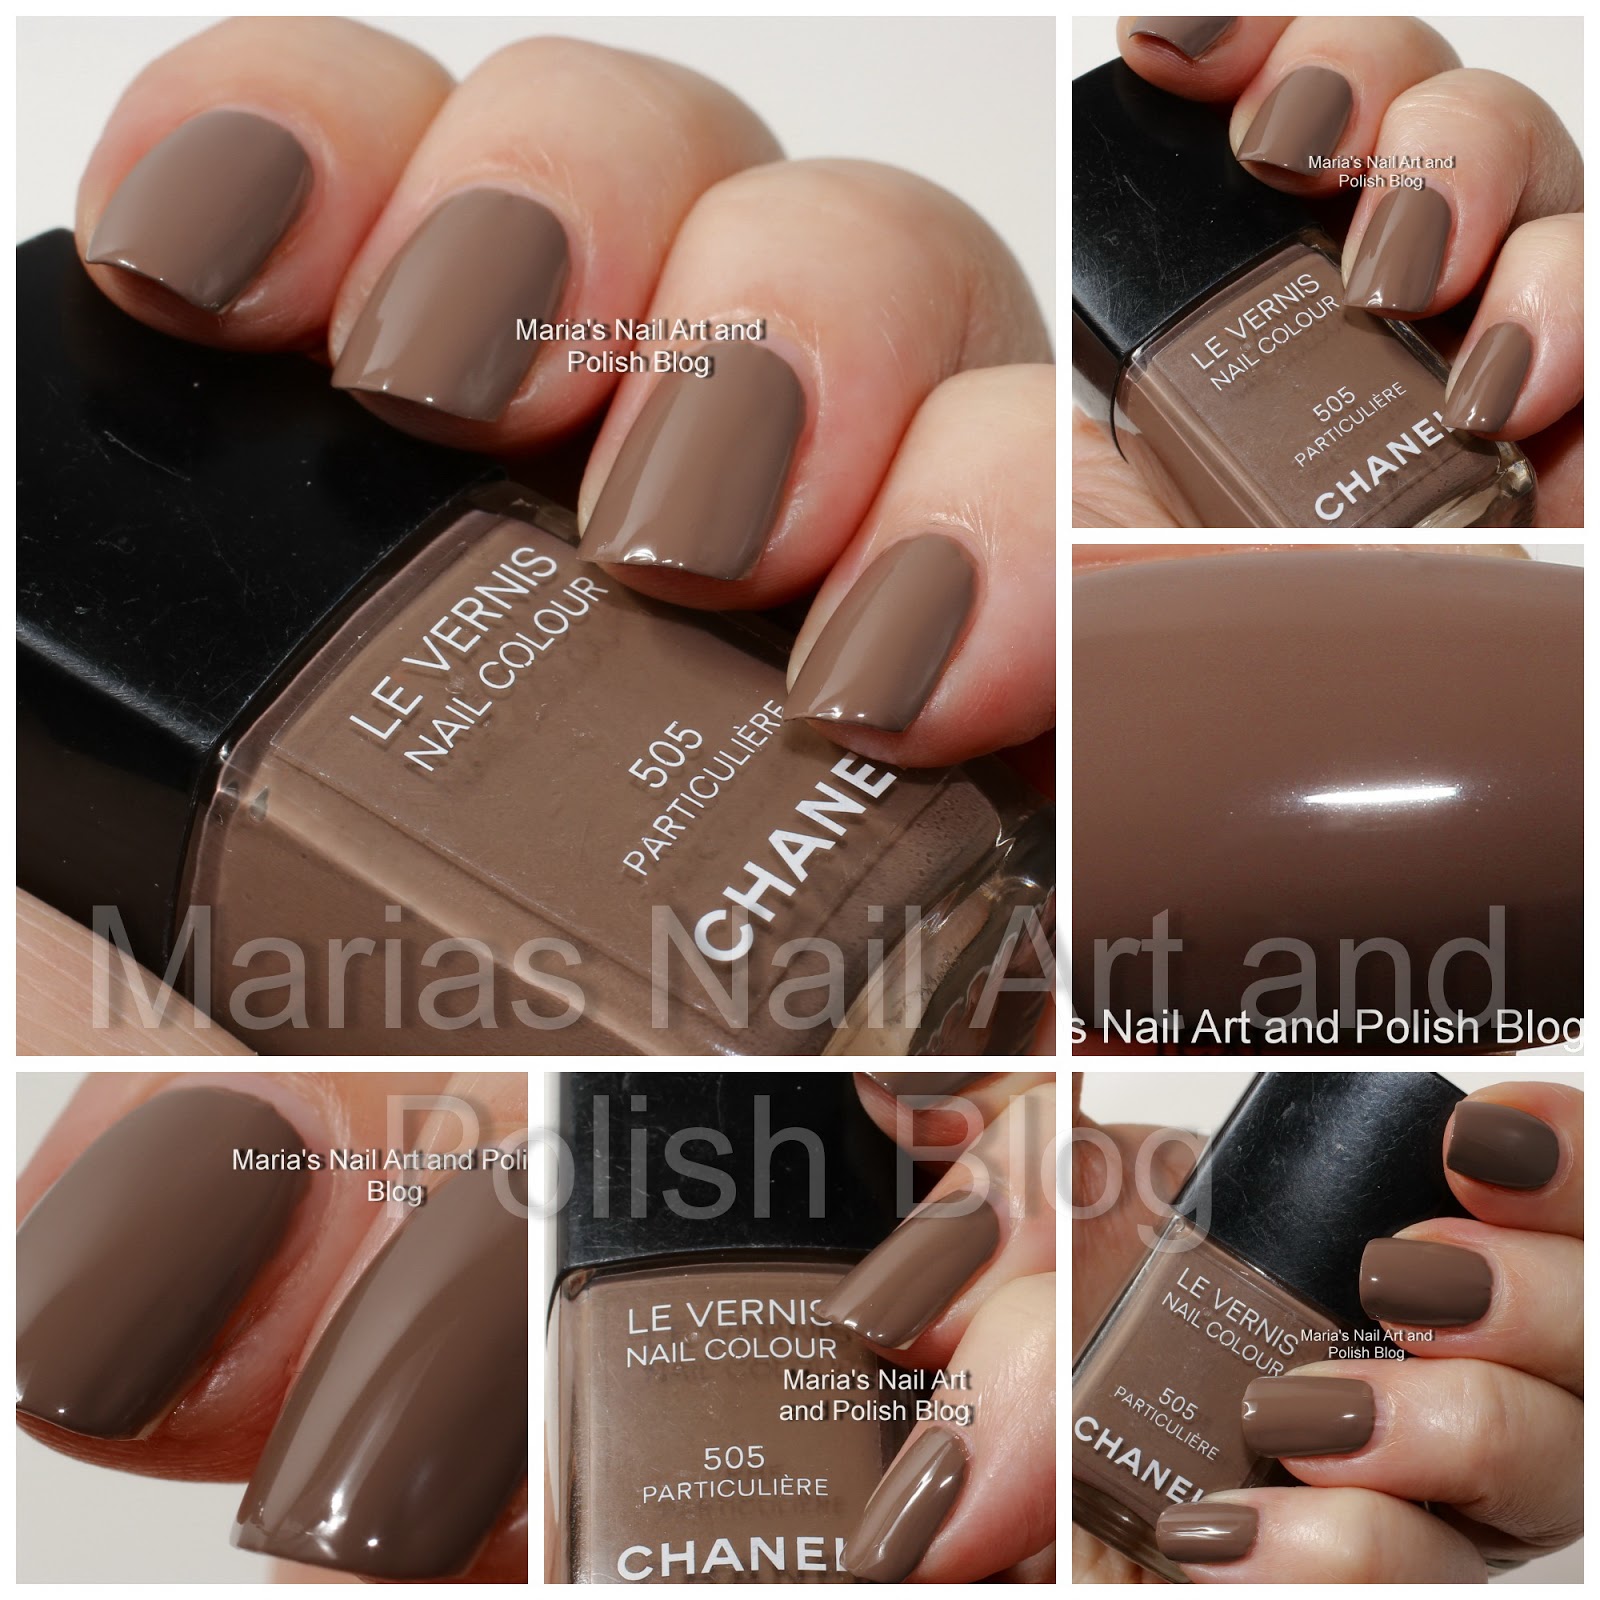 Marias Nail Art and Polish Blog: Chanel Claire-Obscur 83, Les Vernis  Facettes coll. 2000 - Collaboration Saturday